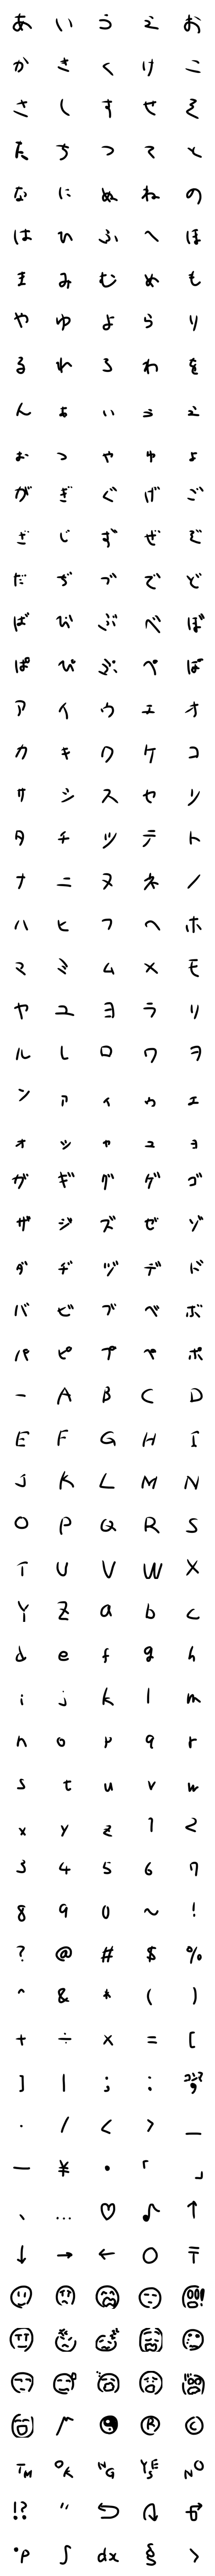 [LINE絵文字]雑字の画像一覧